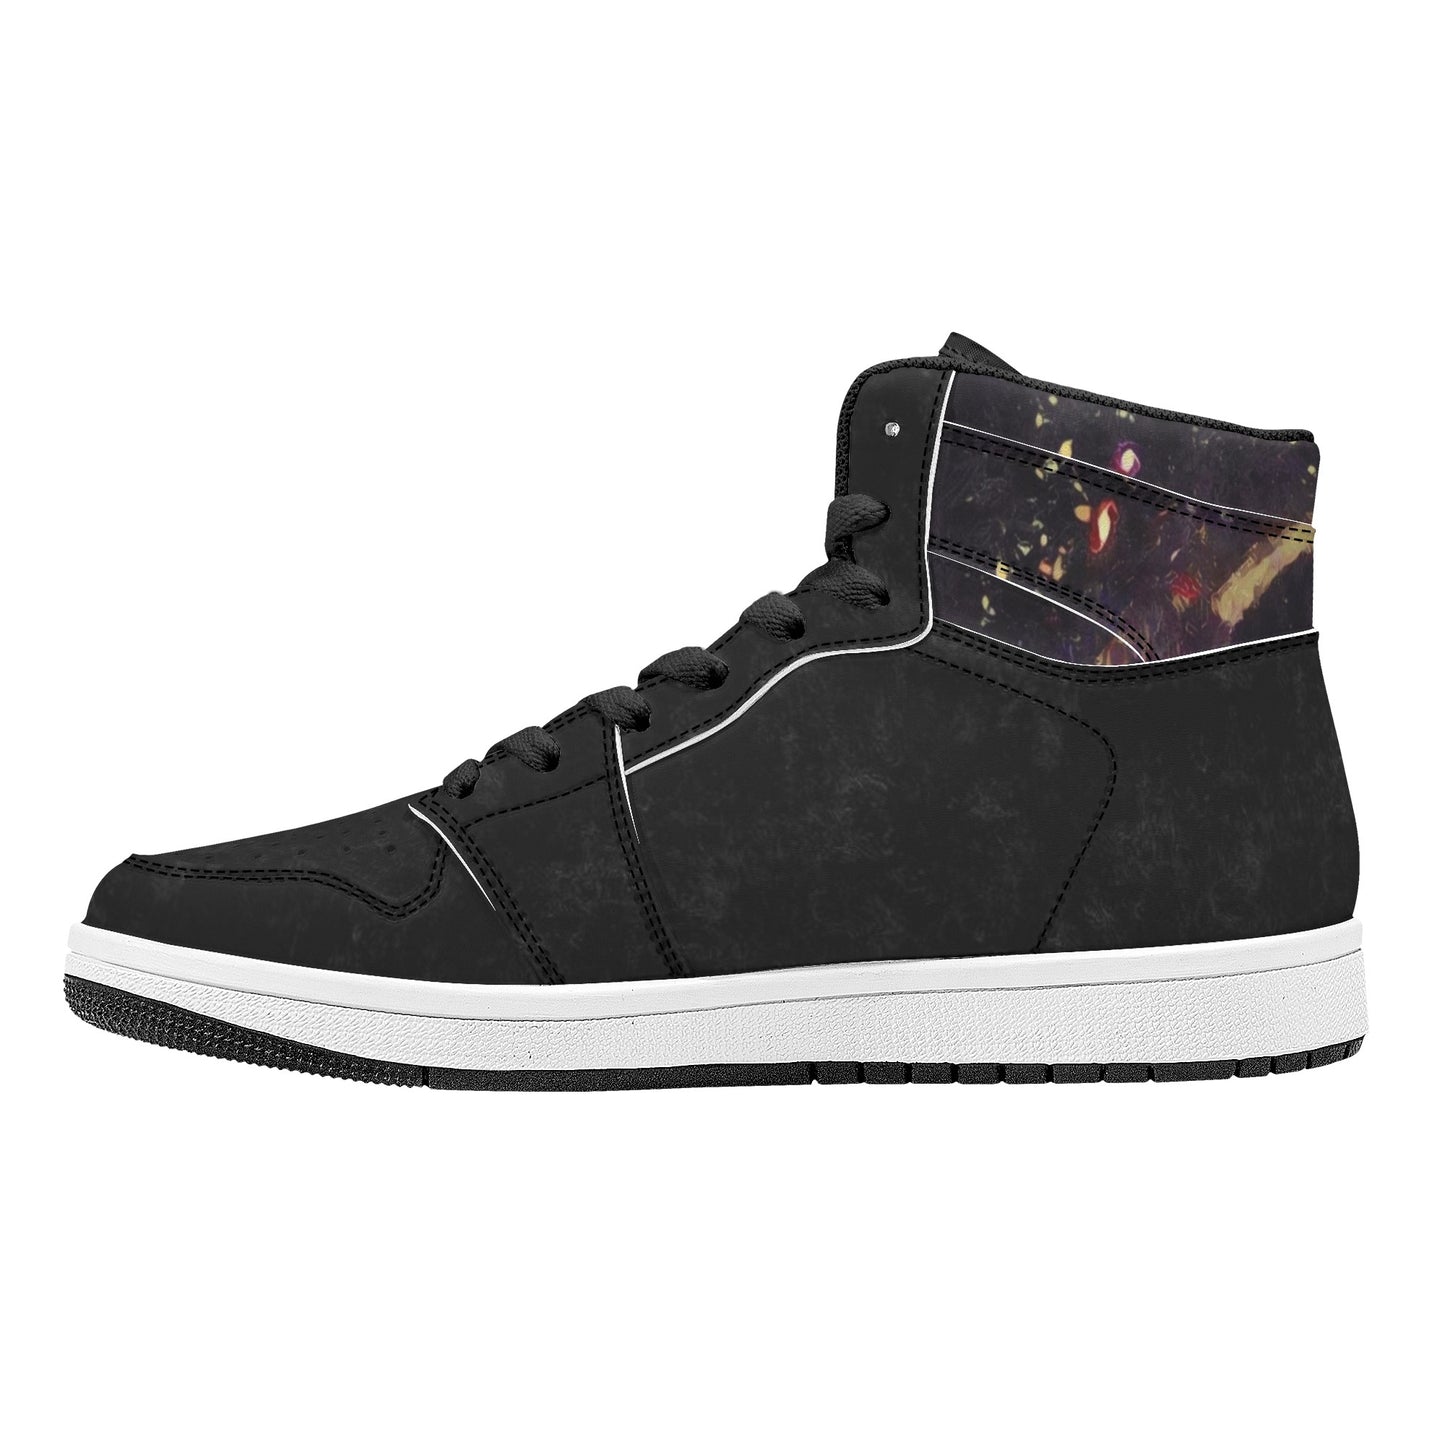 CV20YL - HINDSIGHT CHILLZ Mens High Top Leather Sneakers